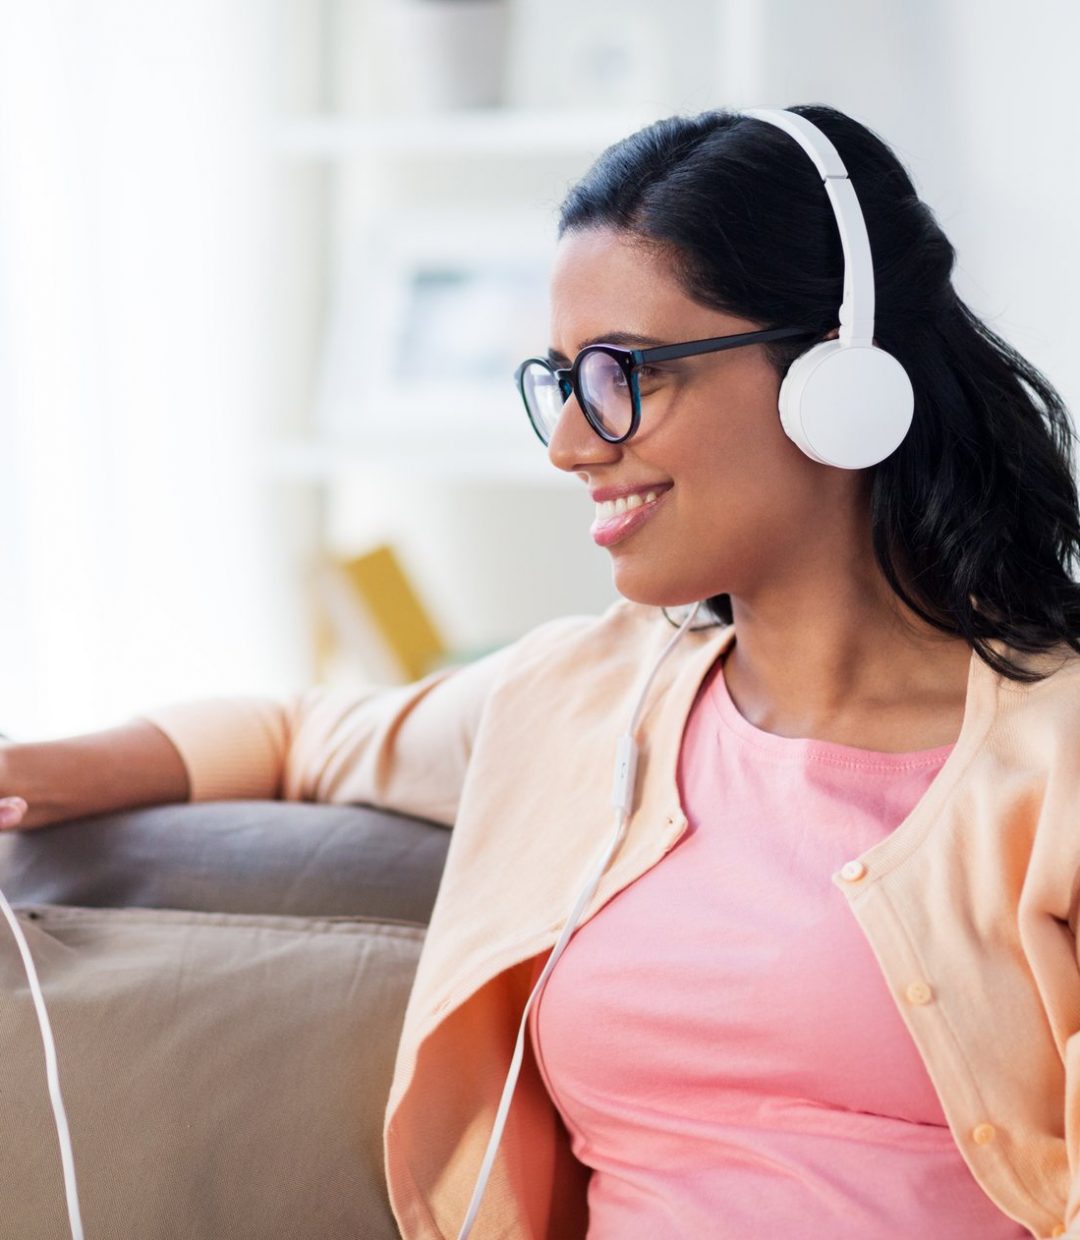 happy-woman-with-tablet-pc-and-headphones-at-home-P32QZJA